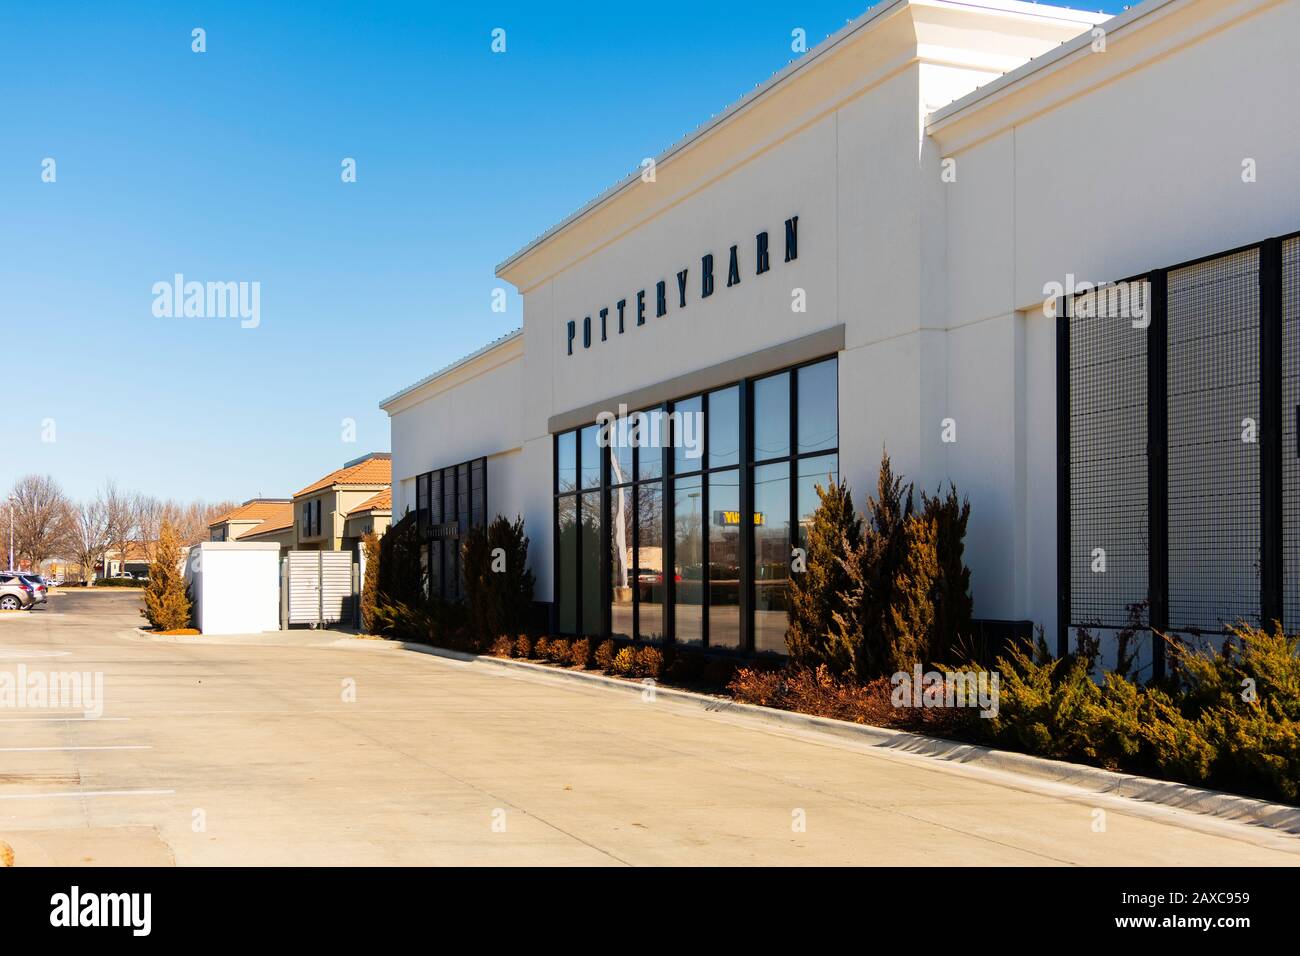 Pottery barn store hi-res stock photography and images - Alamy